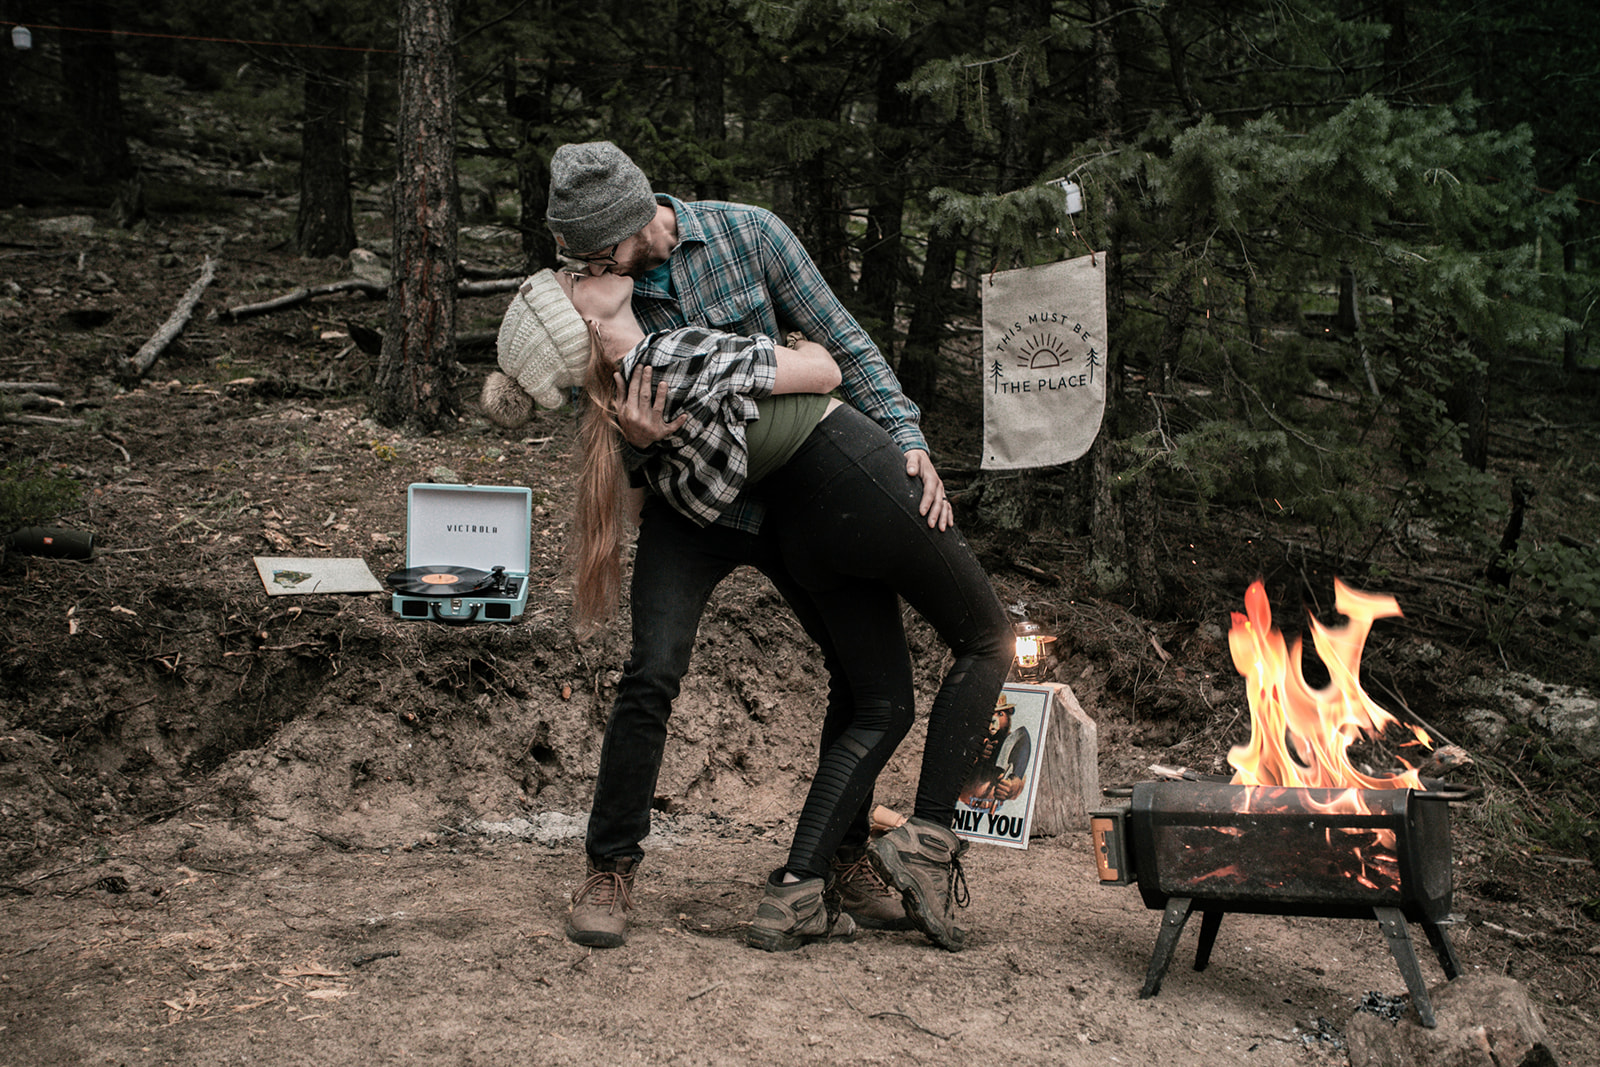 Dancing in the woods with an old fashioned record playing is so romantic